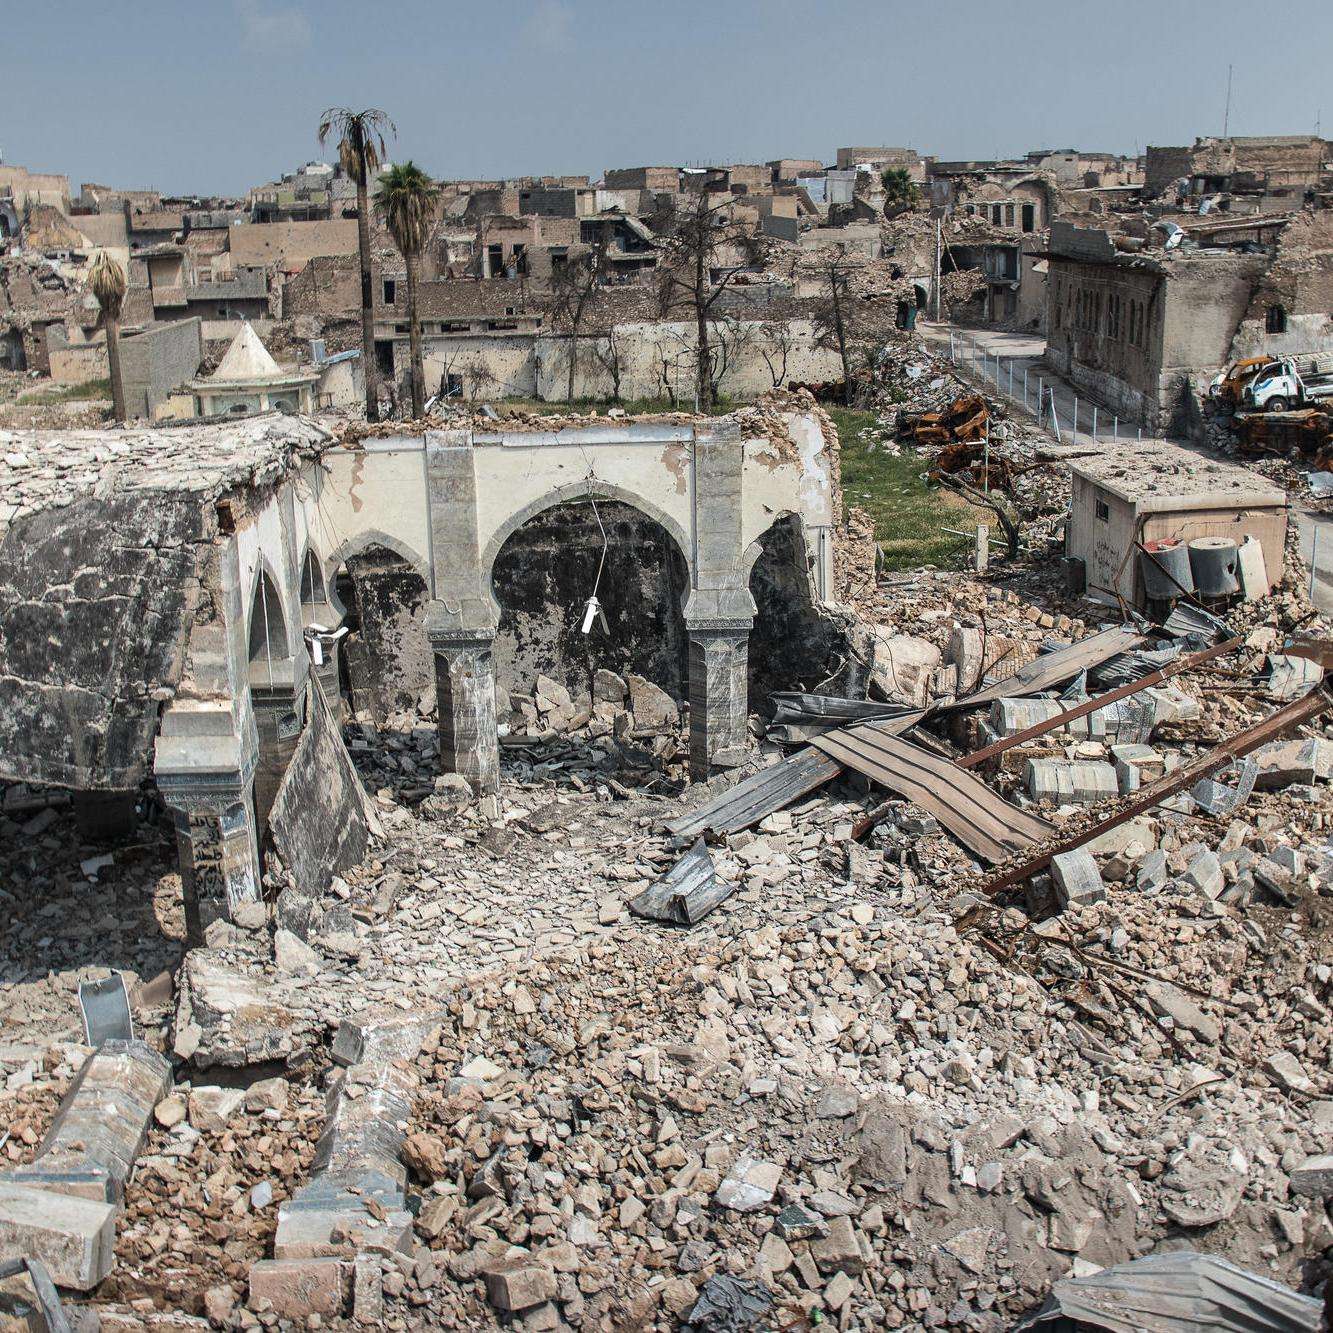 NFI distribution in Mosul's Old City